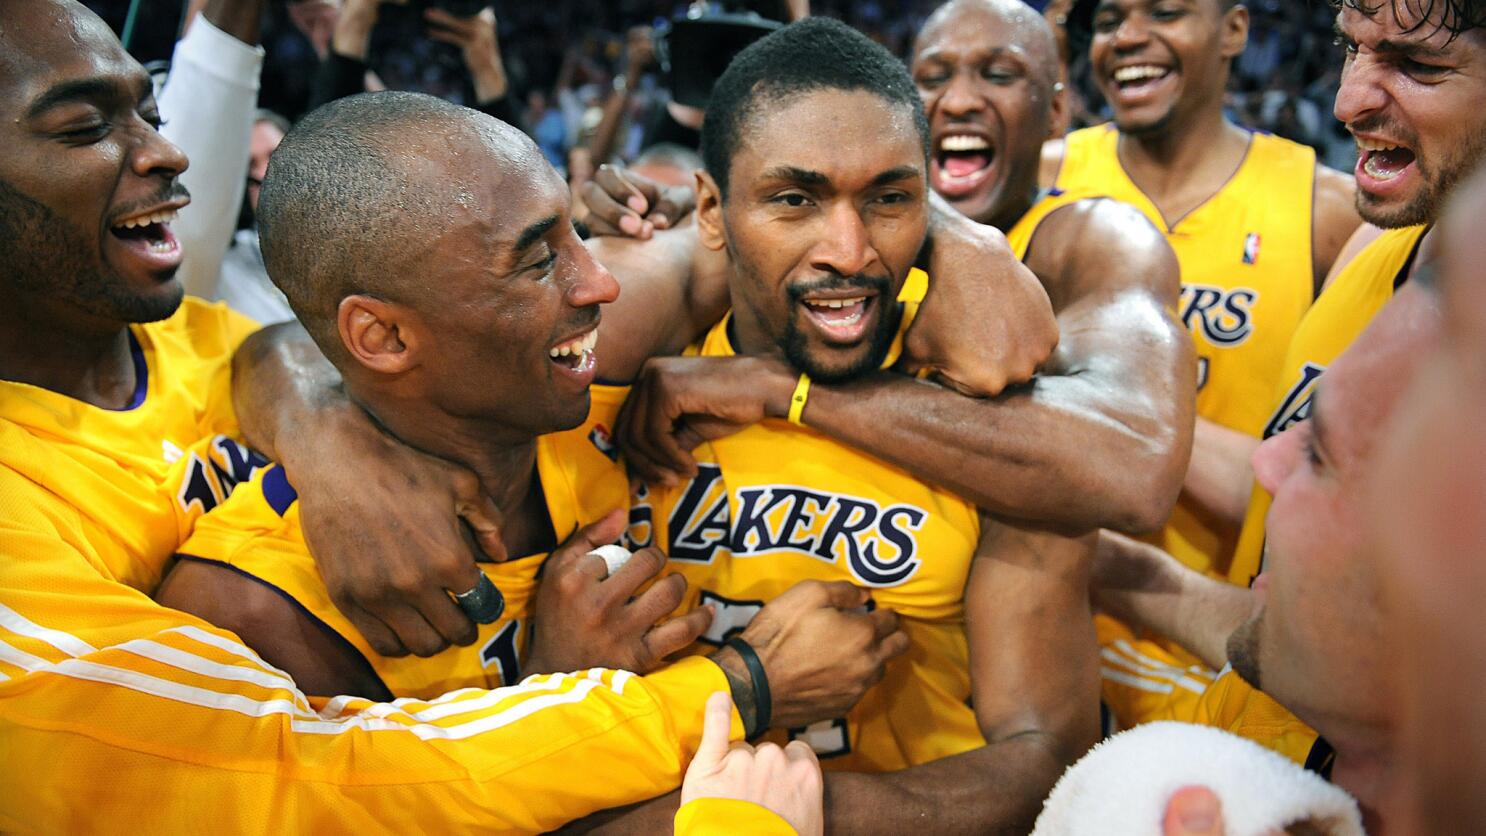 Metta World Peace (formerly known as Ron Artest) - NBA champion